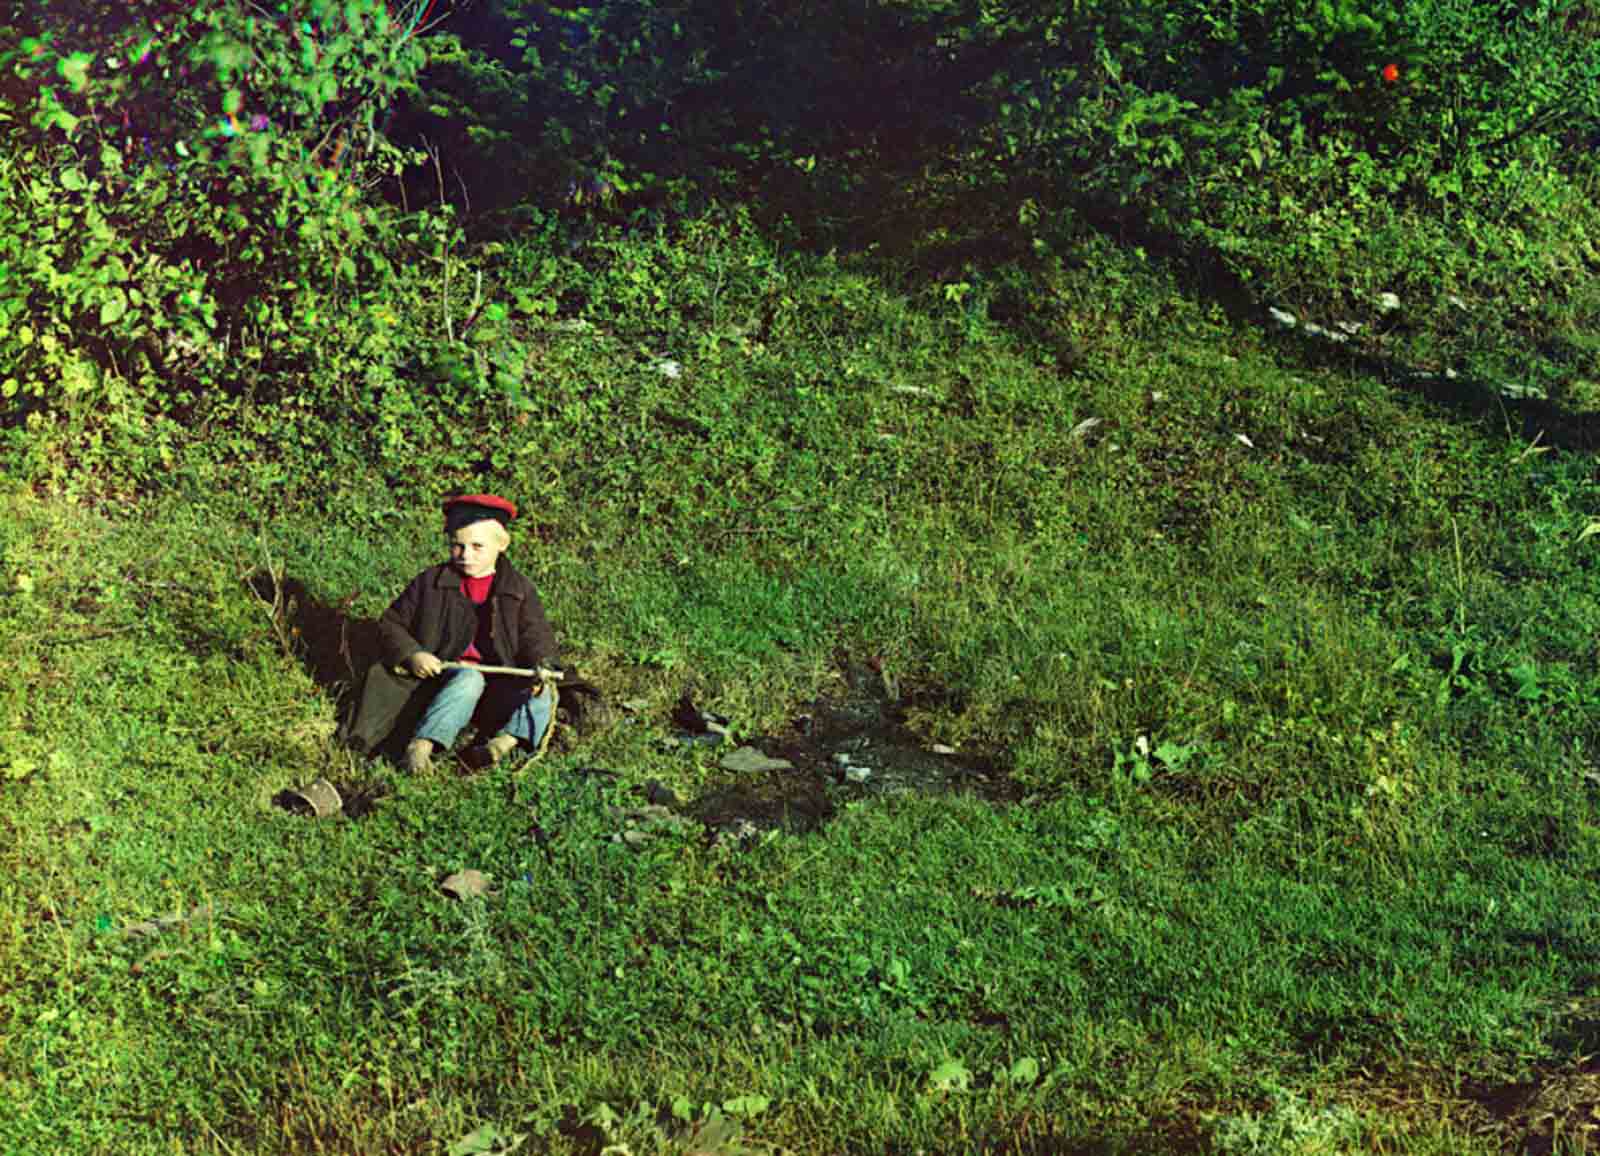 On the Sim River, a shepherd boy. Photo was taken in 1910, from the album “Views in the Ural Mountains, a survey of an industrial area, Russian Empire”.